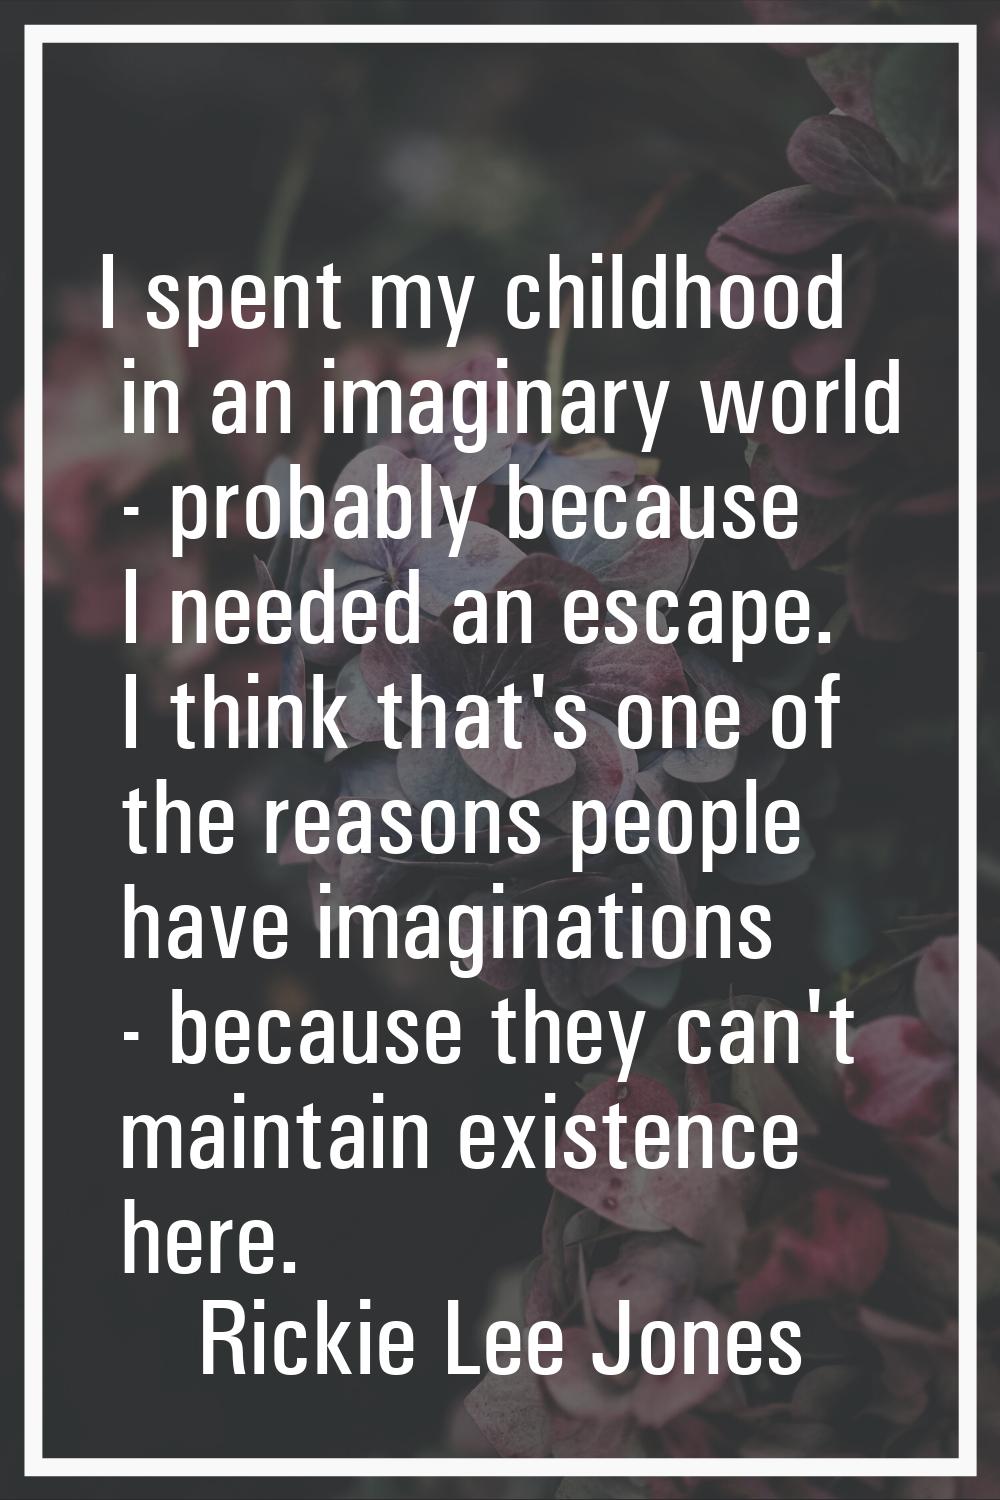 I spent my childhood in an imaginary world - probably because I needed an escape. I think that's on